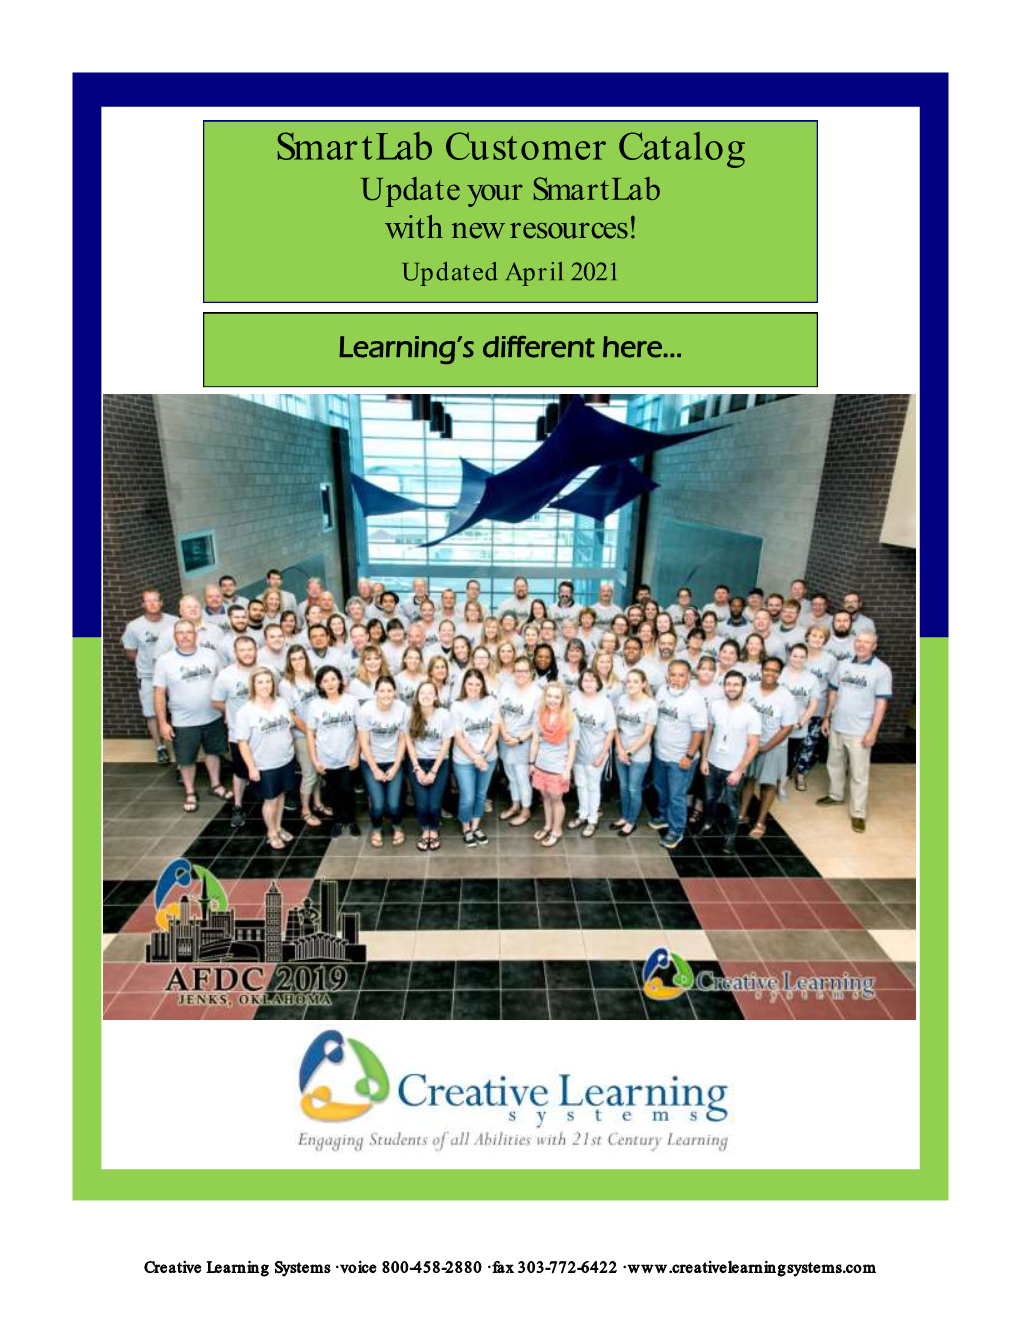 Smartlab Customer Catalog Update Your Smartlab with New Resources!